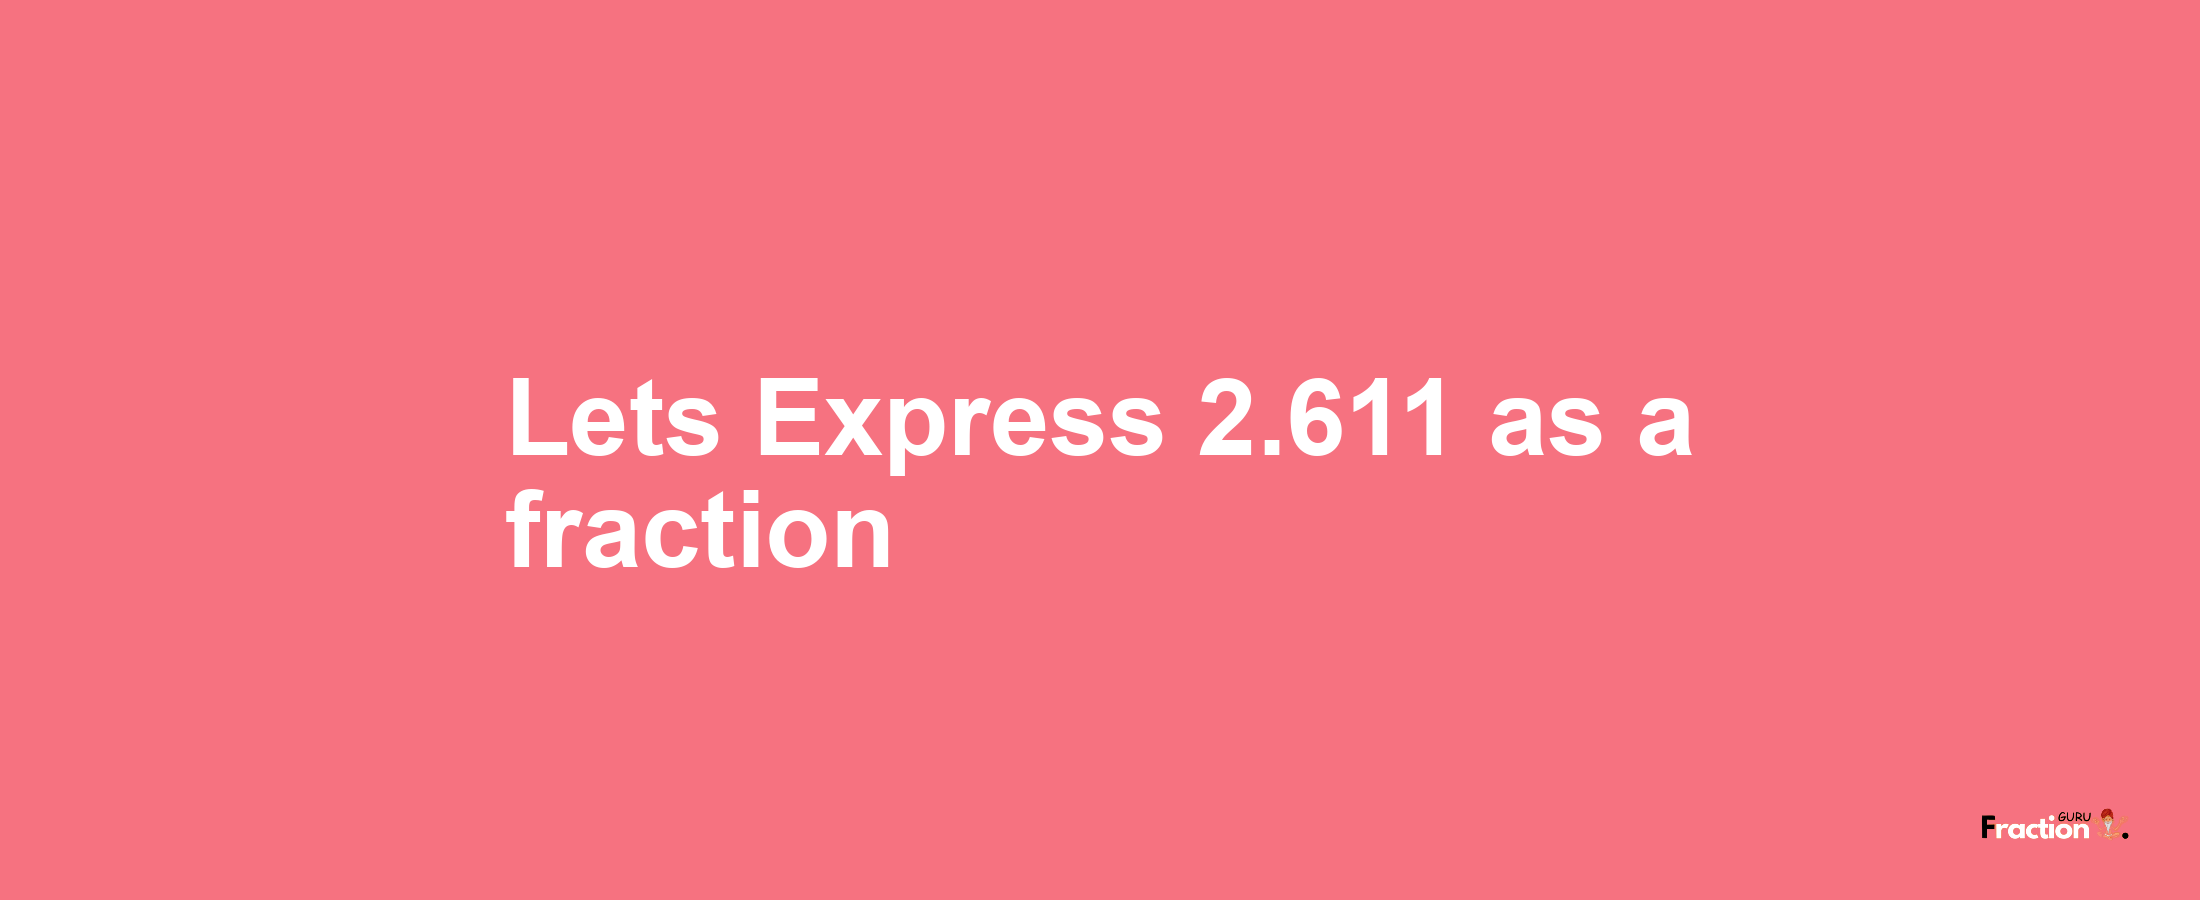 Lets Express 2.611 as afraction